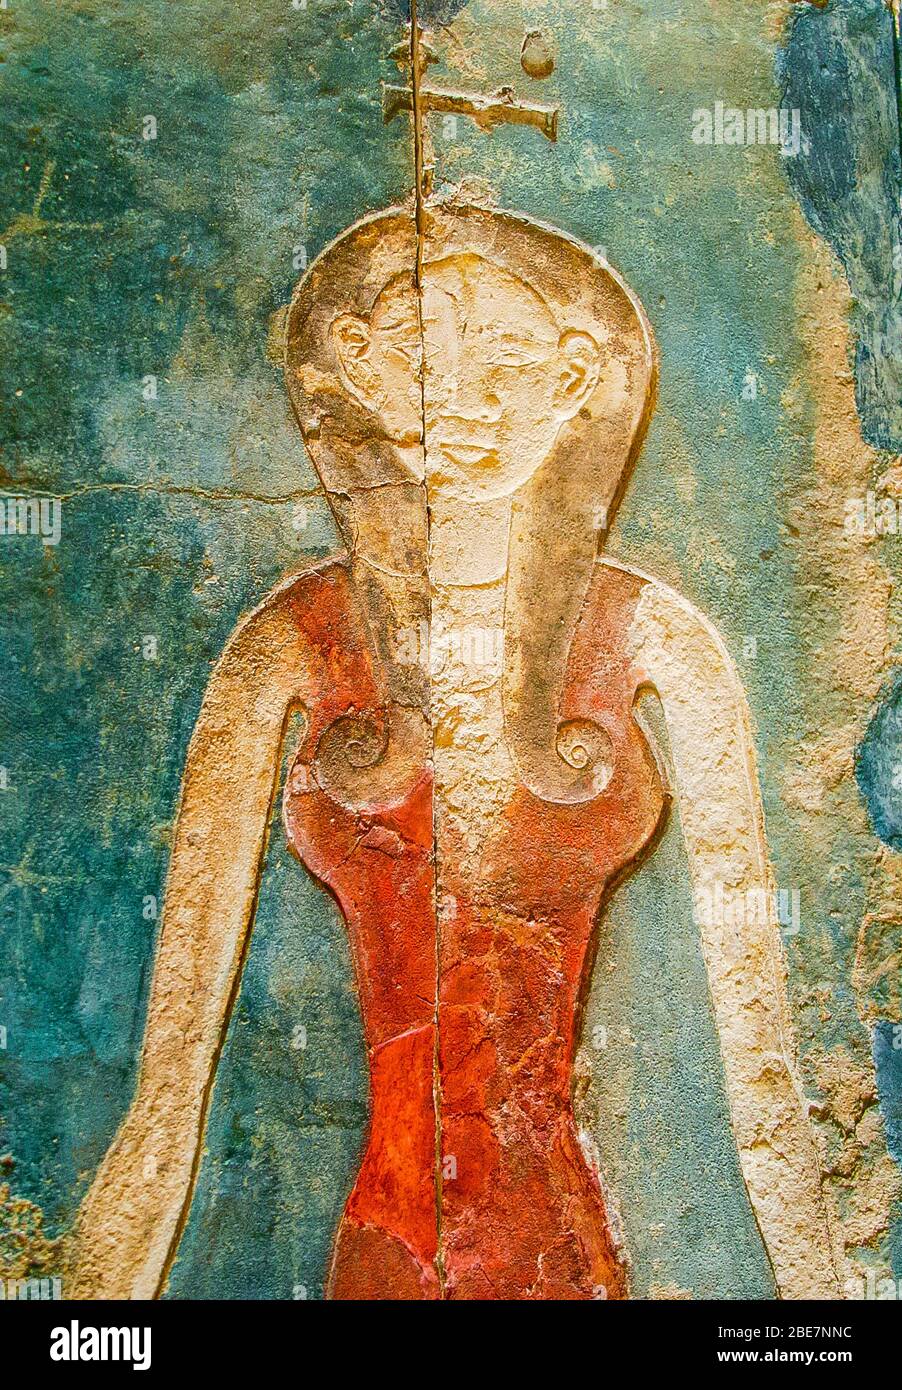 Egypt, Cairo, Heliopolis, future open air museum. Tomb of Panehesy, 26th dynasty. The Nut goddess on the ceiling. Stock Photo